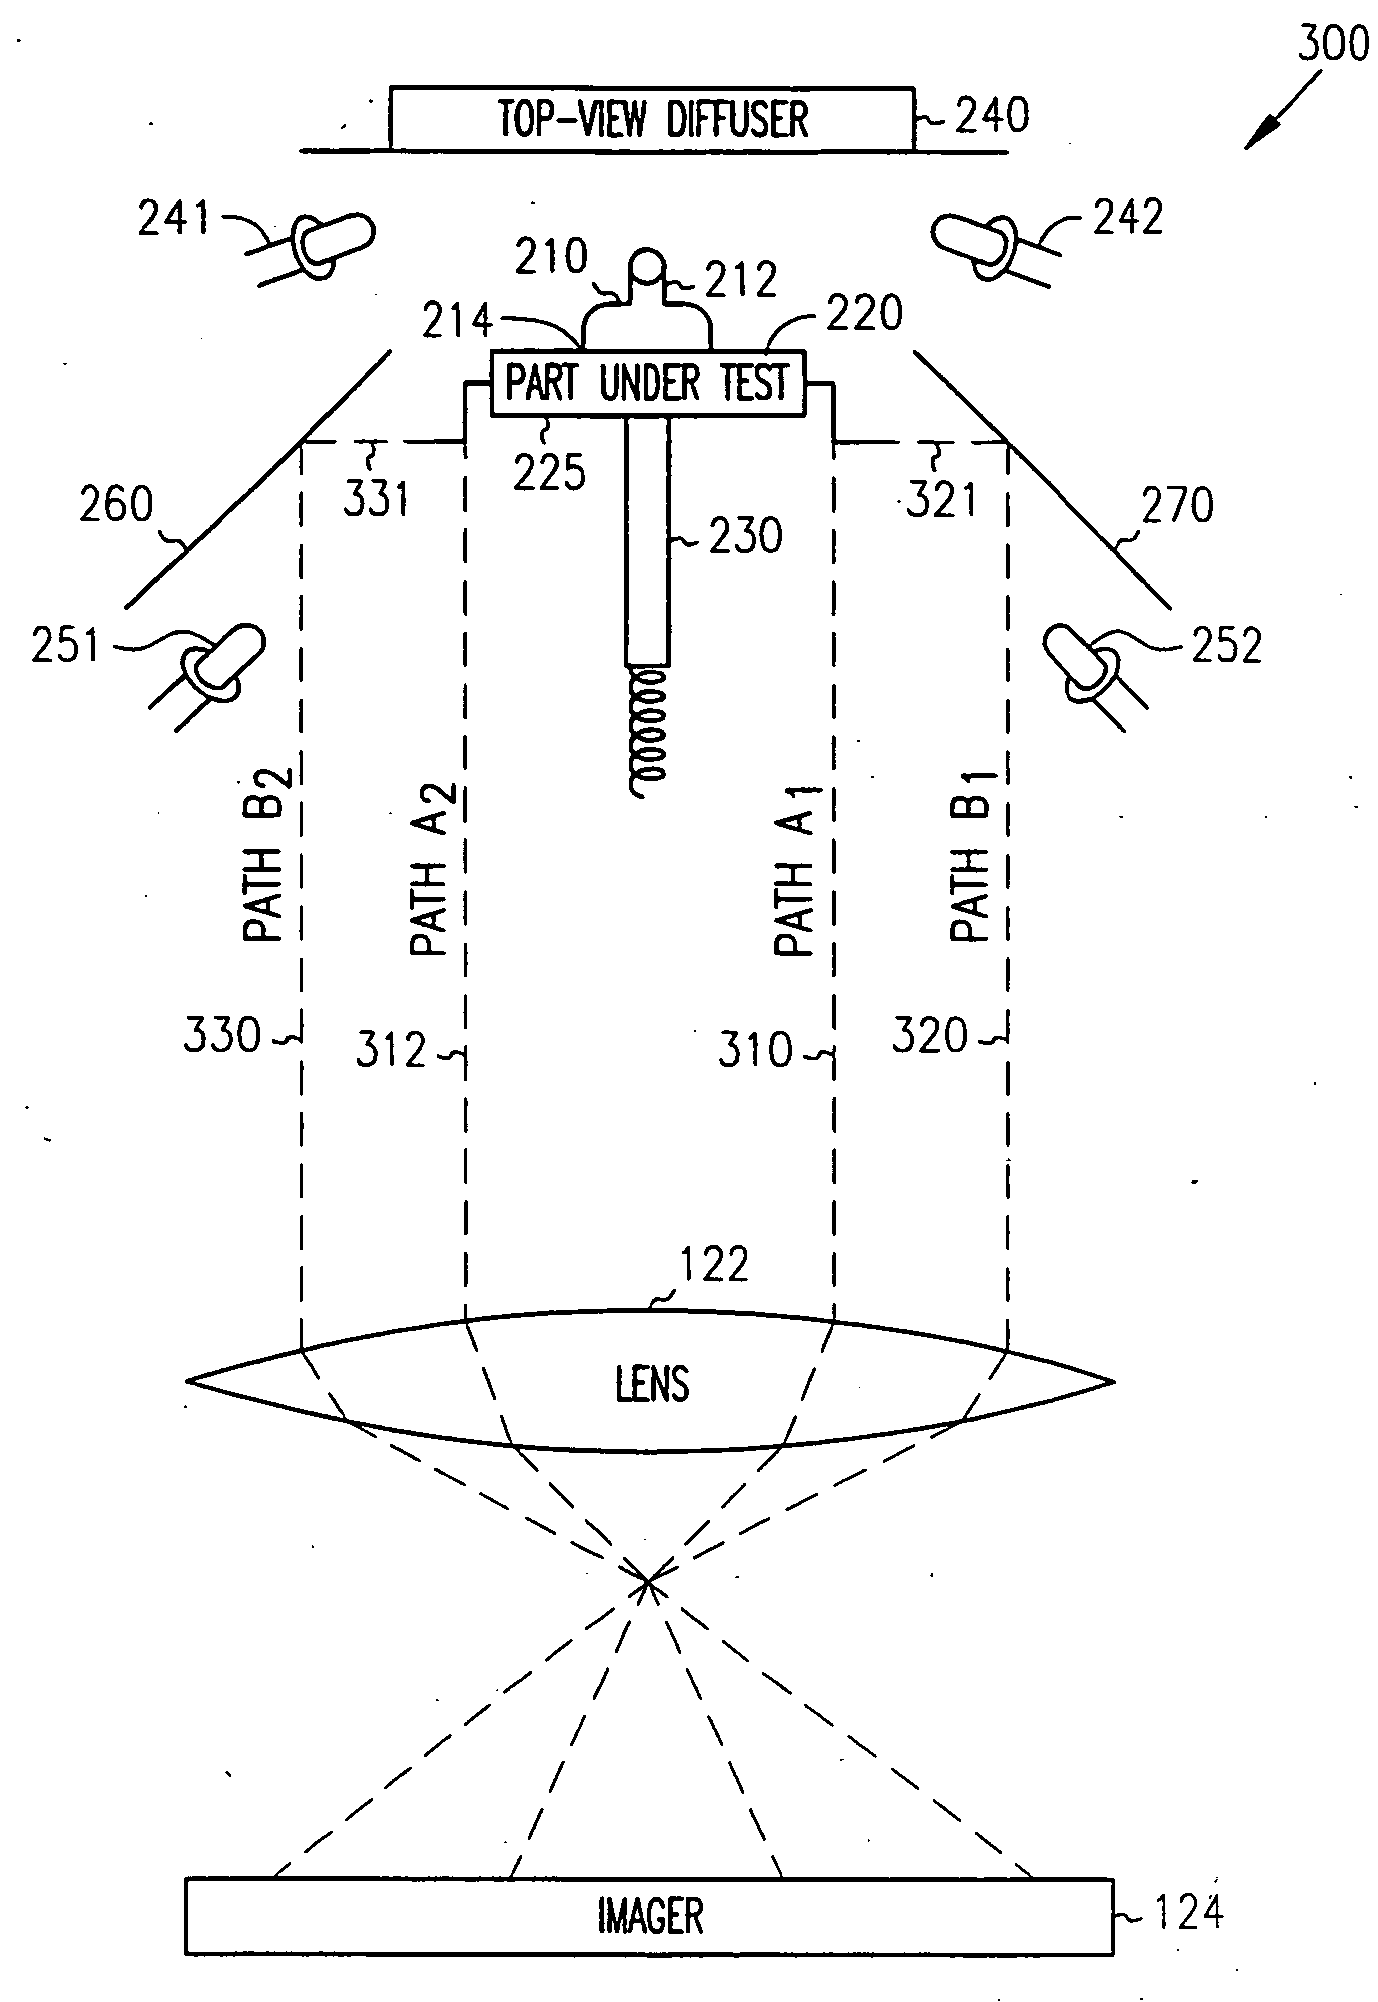 Method and apparatus for backlighting and imaging multiple views of isolated features of an object